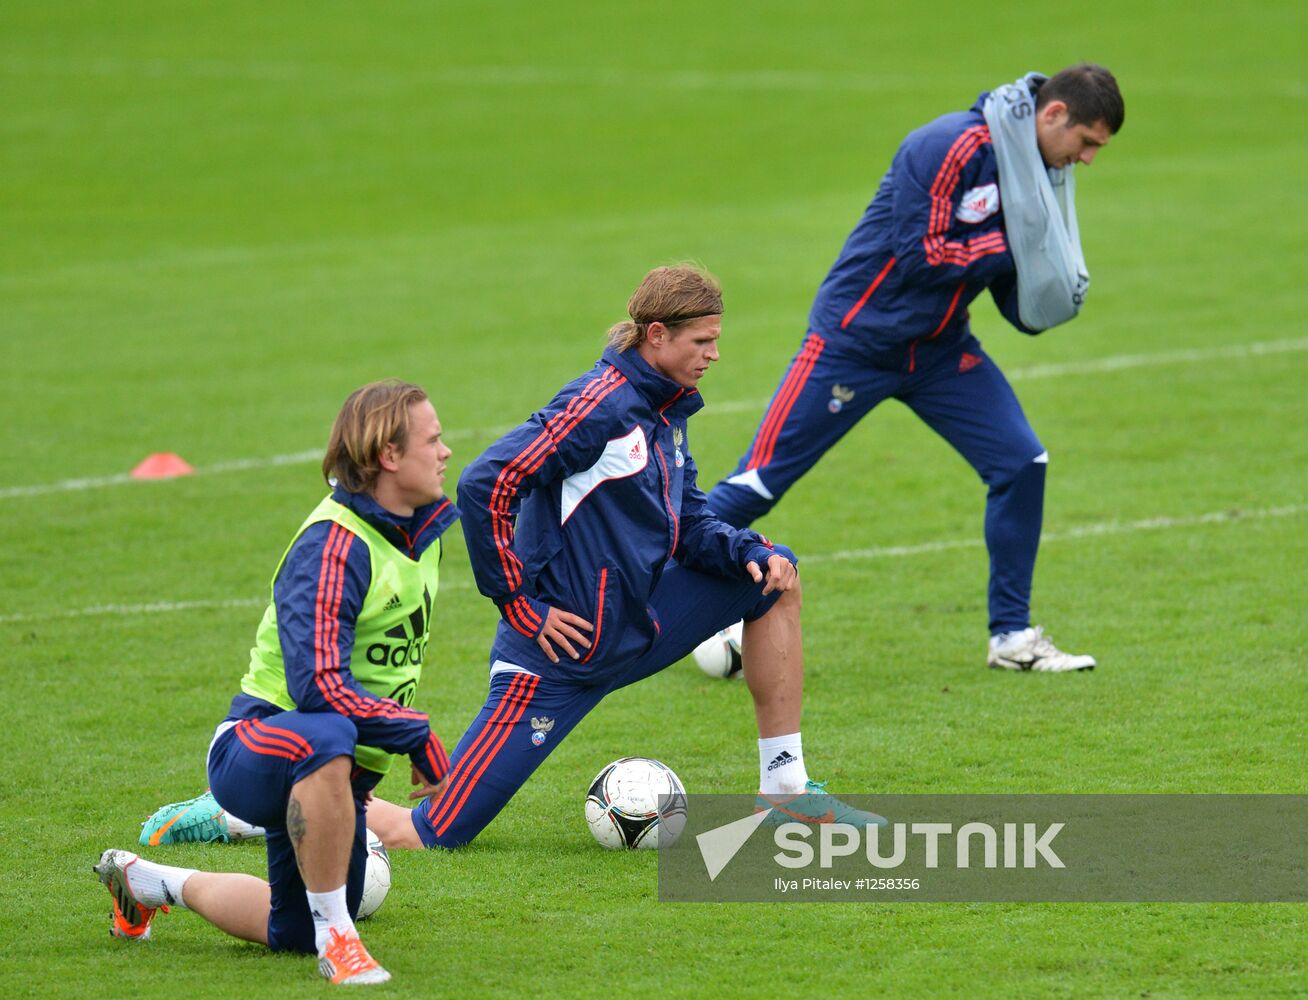 Football. Russian national team holds training